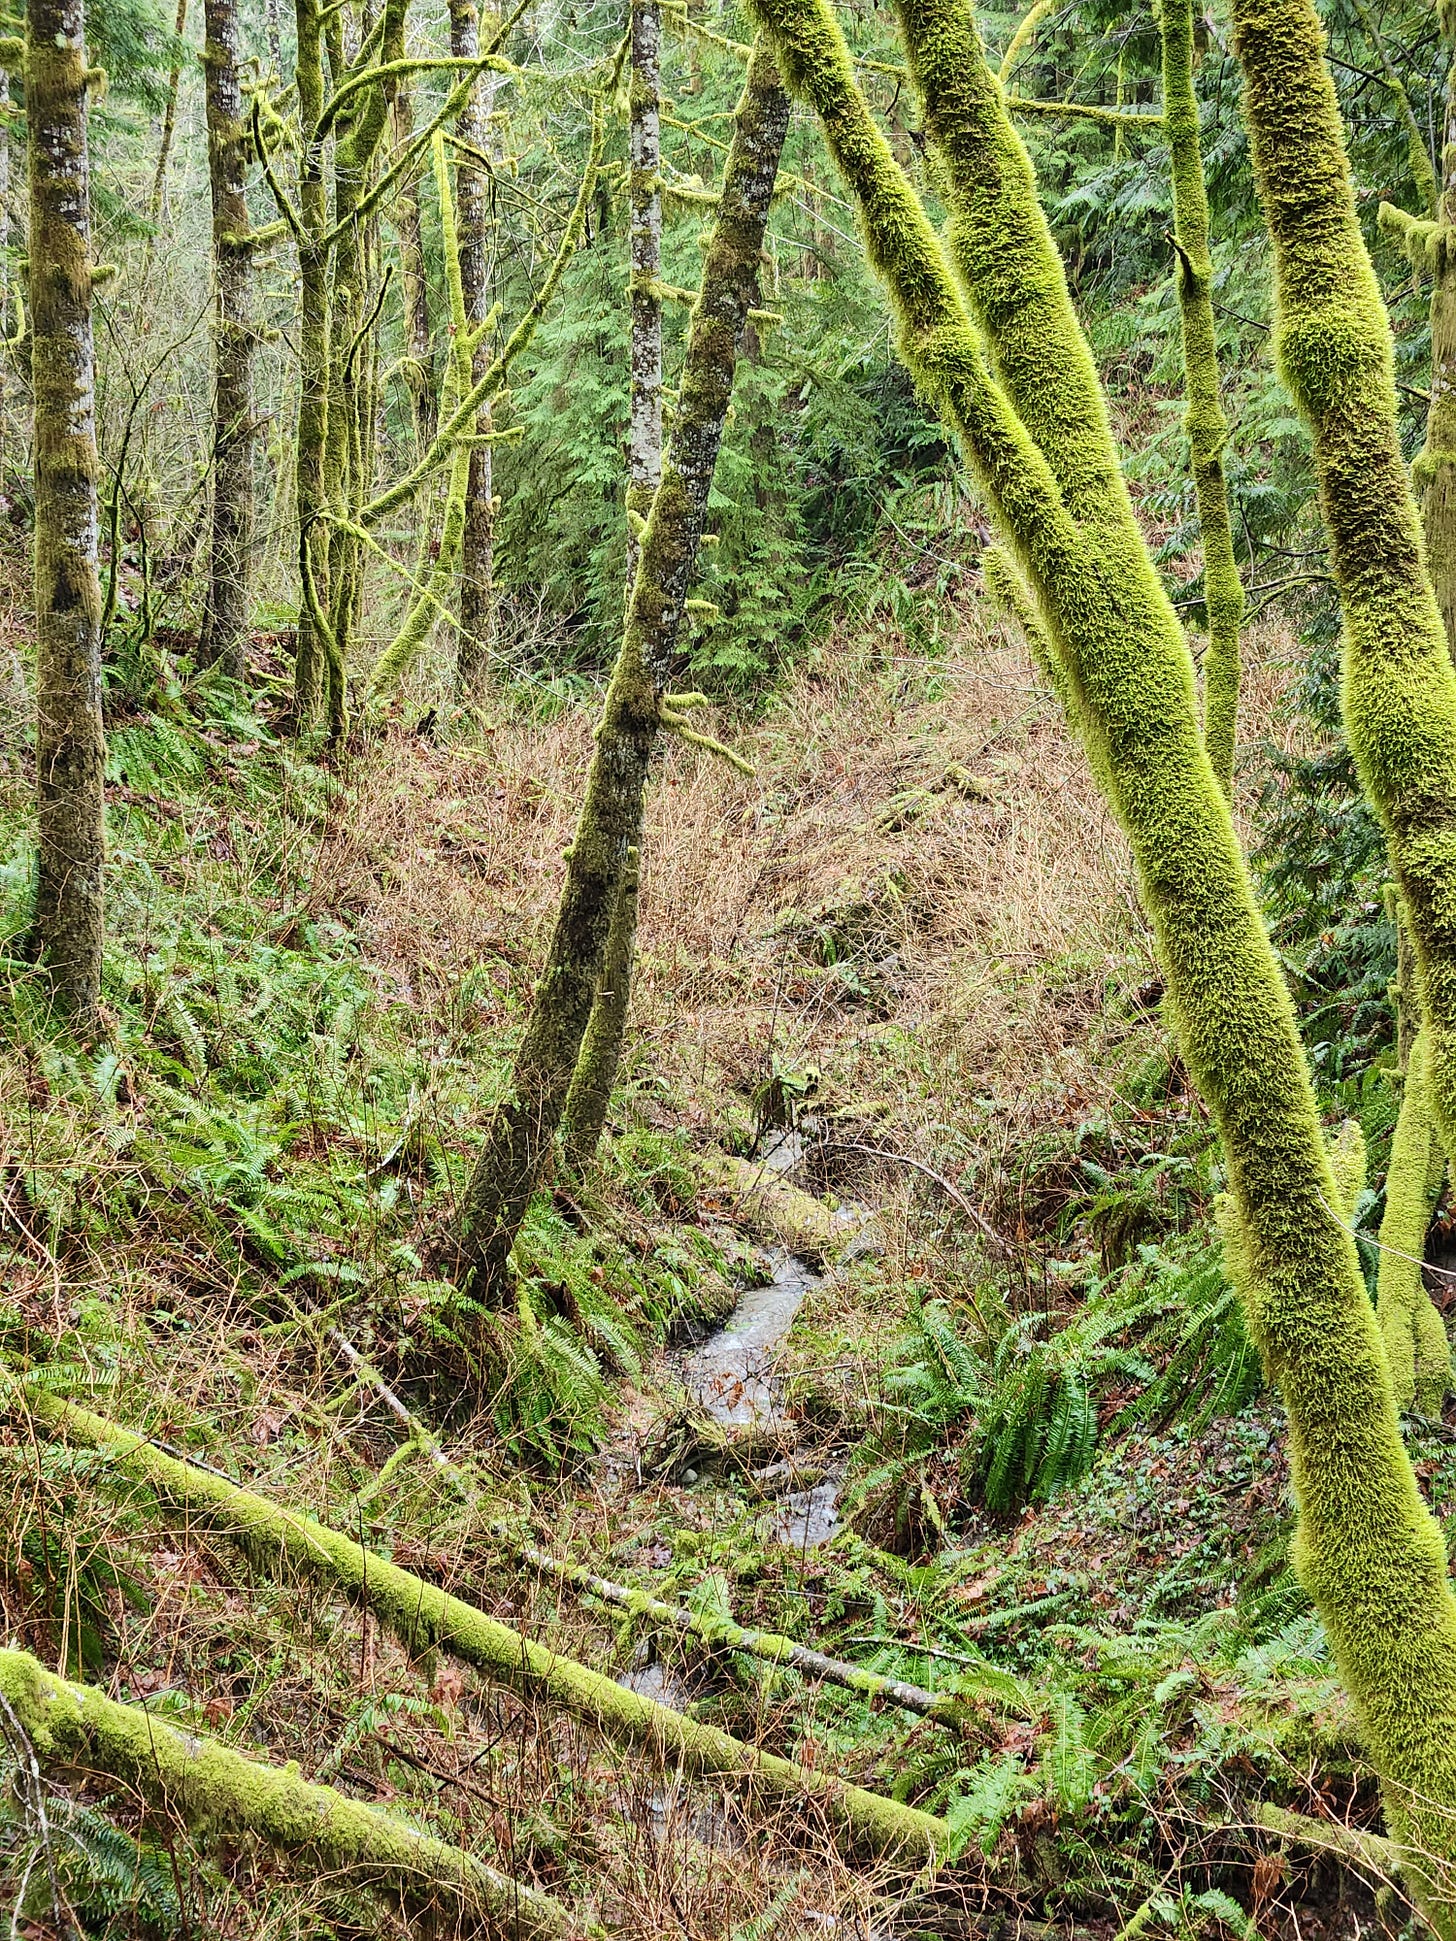 small creek, mossy trees leaning over, ferns alongside with other brush